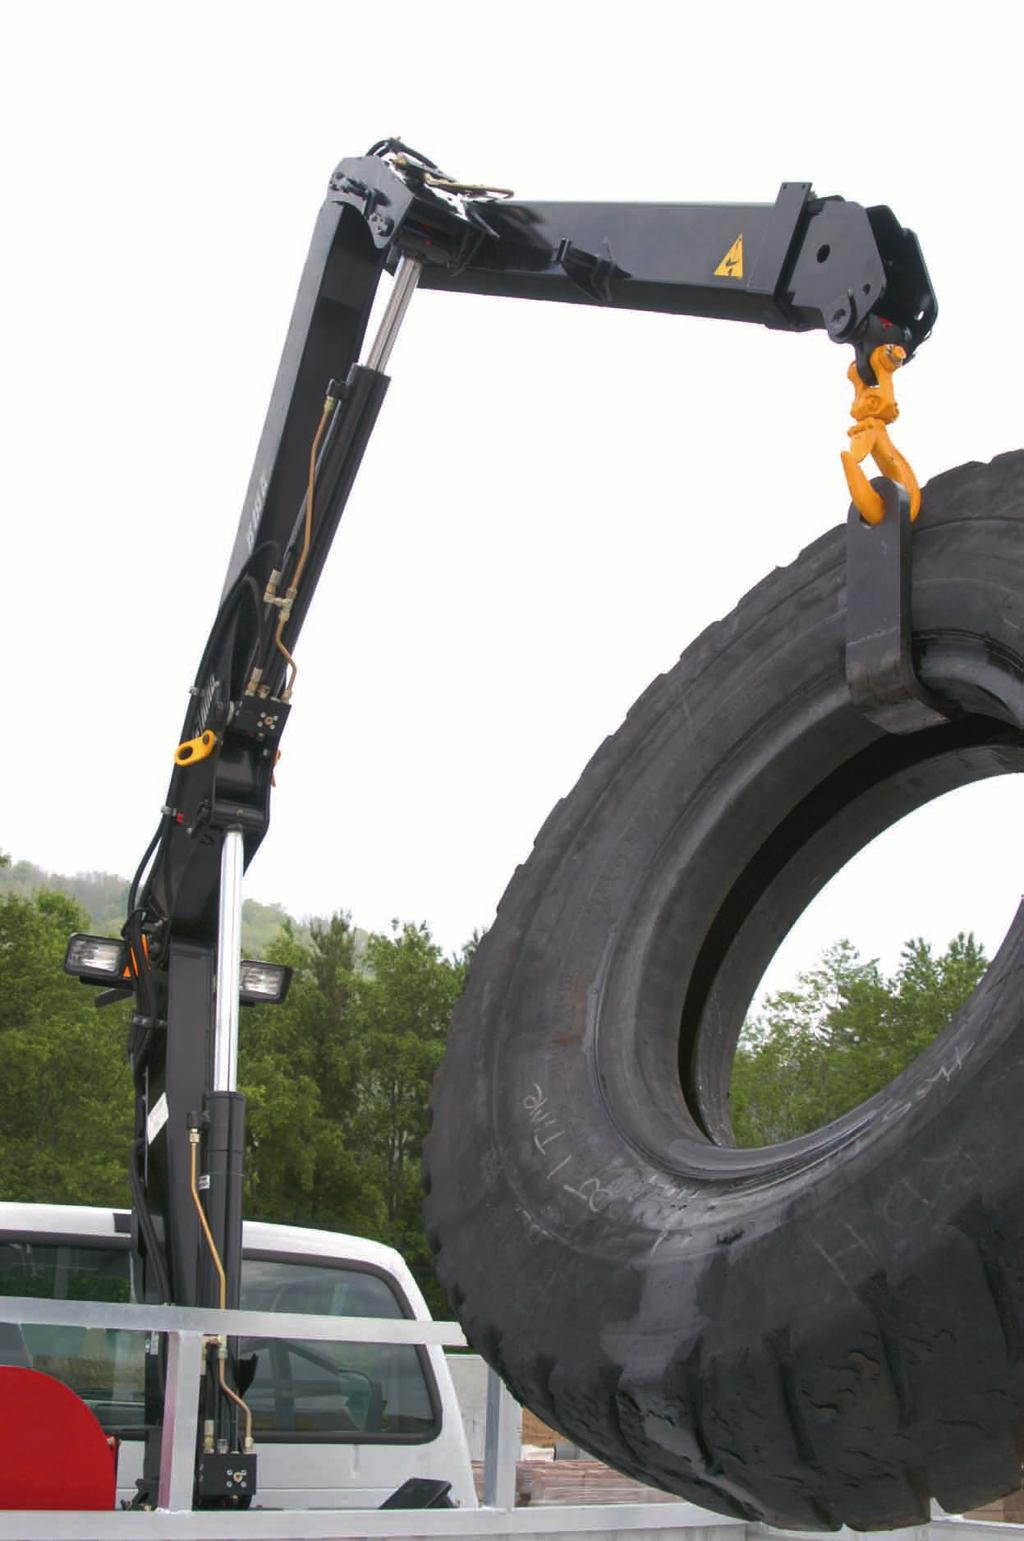 Changing tires efficiently and easily Efficient off-the-road tire management Managing the tires on large articulated dump trucks, scrapers and loaders is a very important job, a job that requires the